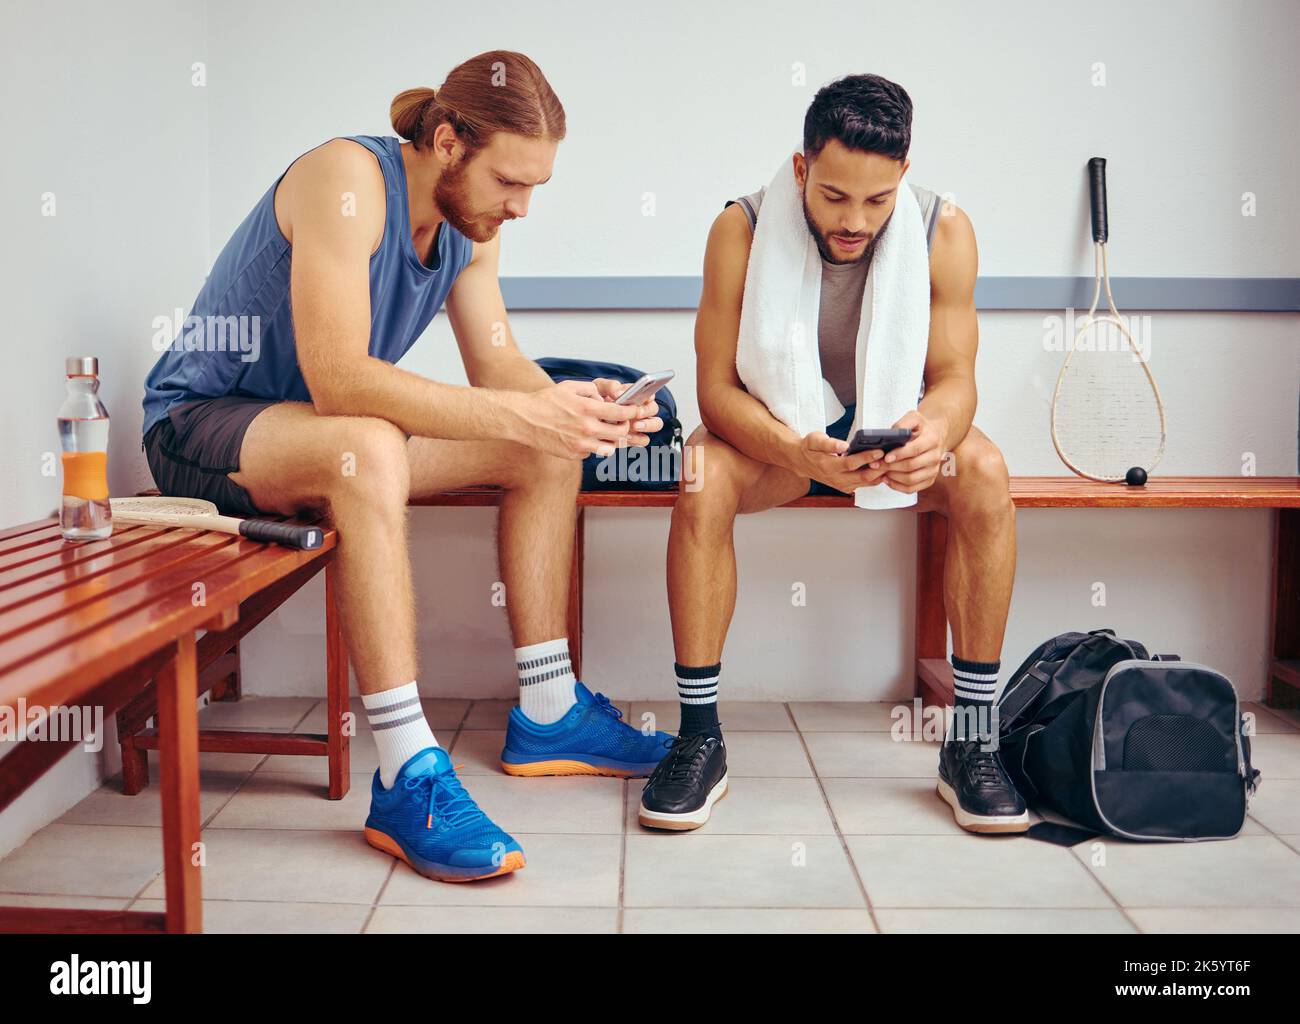 Two players using their cellphones together. Young squash players reading text messages on their smartphones together. Friends relaxing in a gym Stock Photo